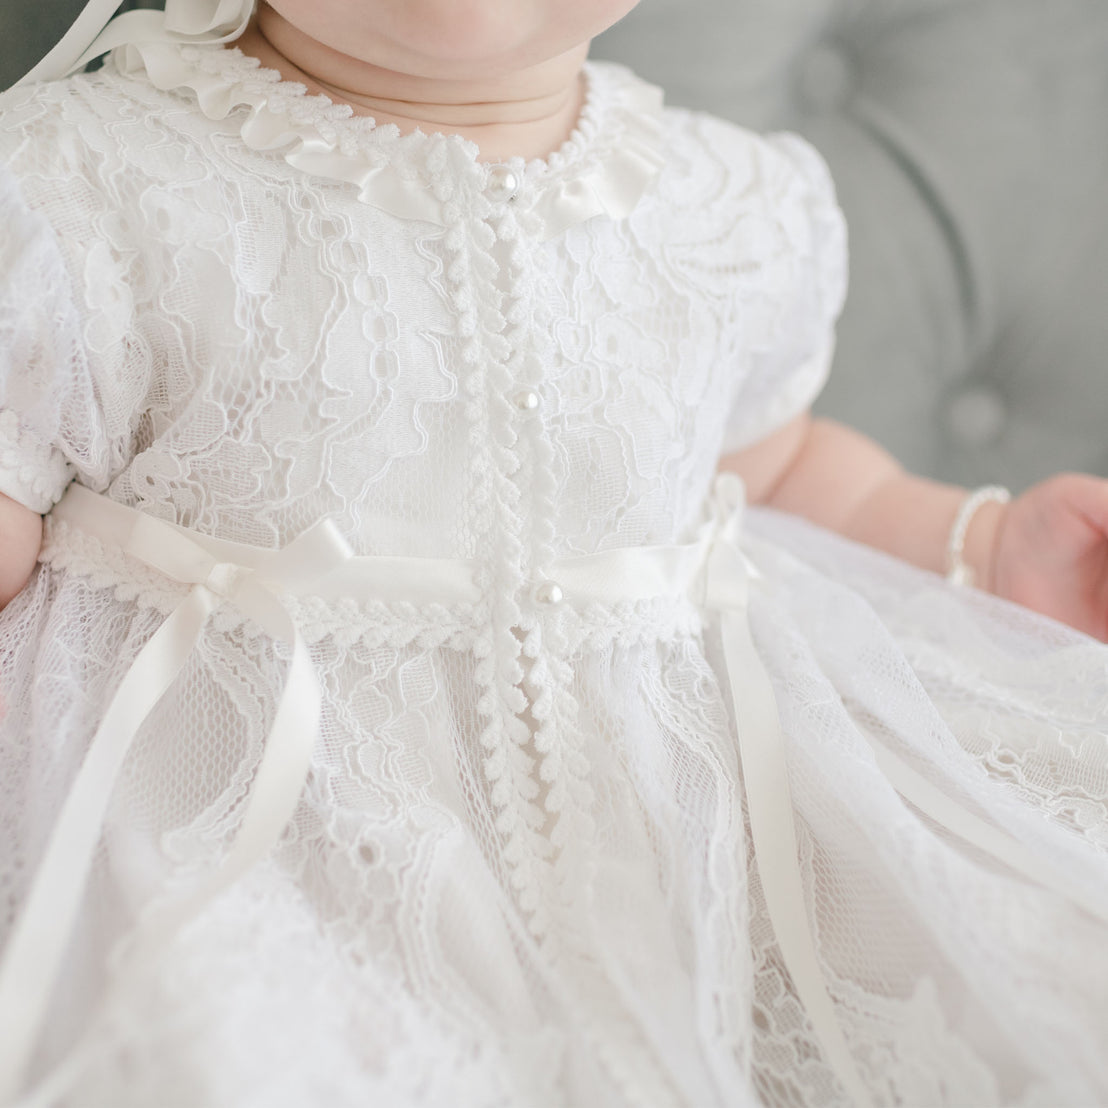 Close-up of a baby dressed in the Aria Christening Gown & Bonnet with ribbon details, focusing on the textured fabric and small pearl embellishments.